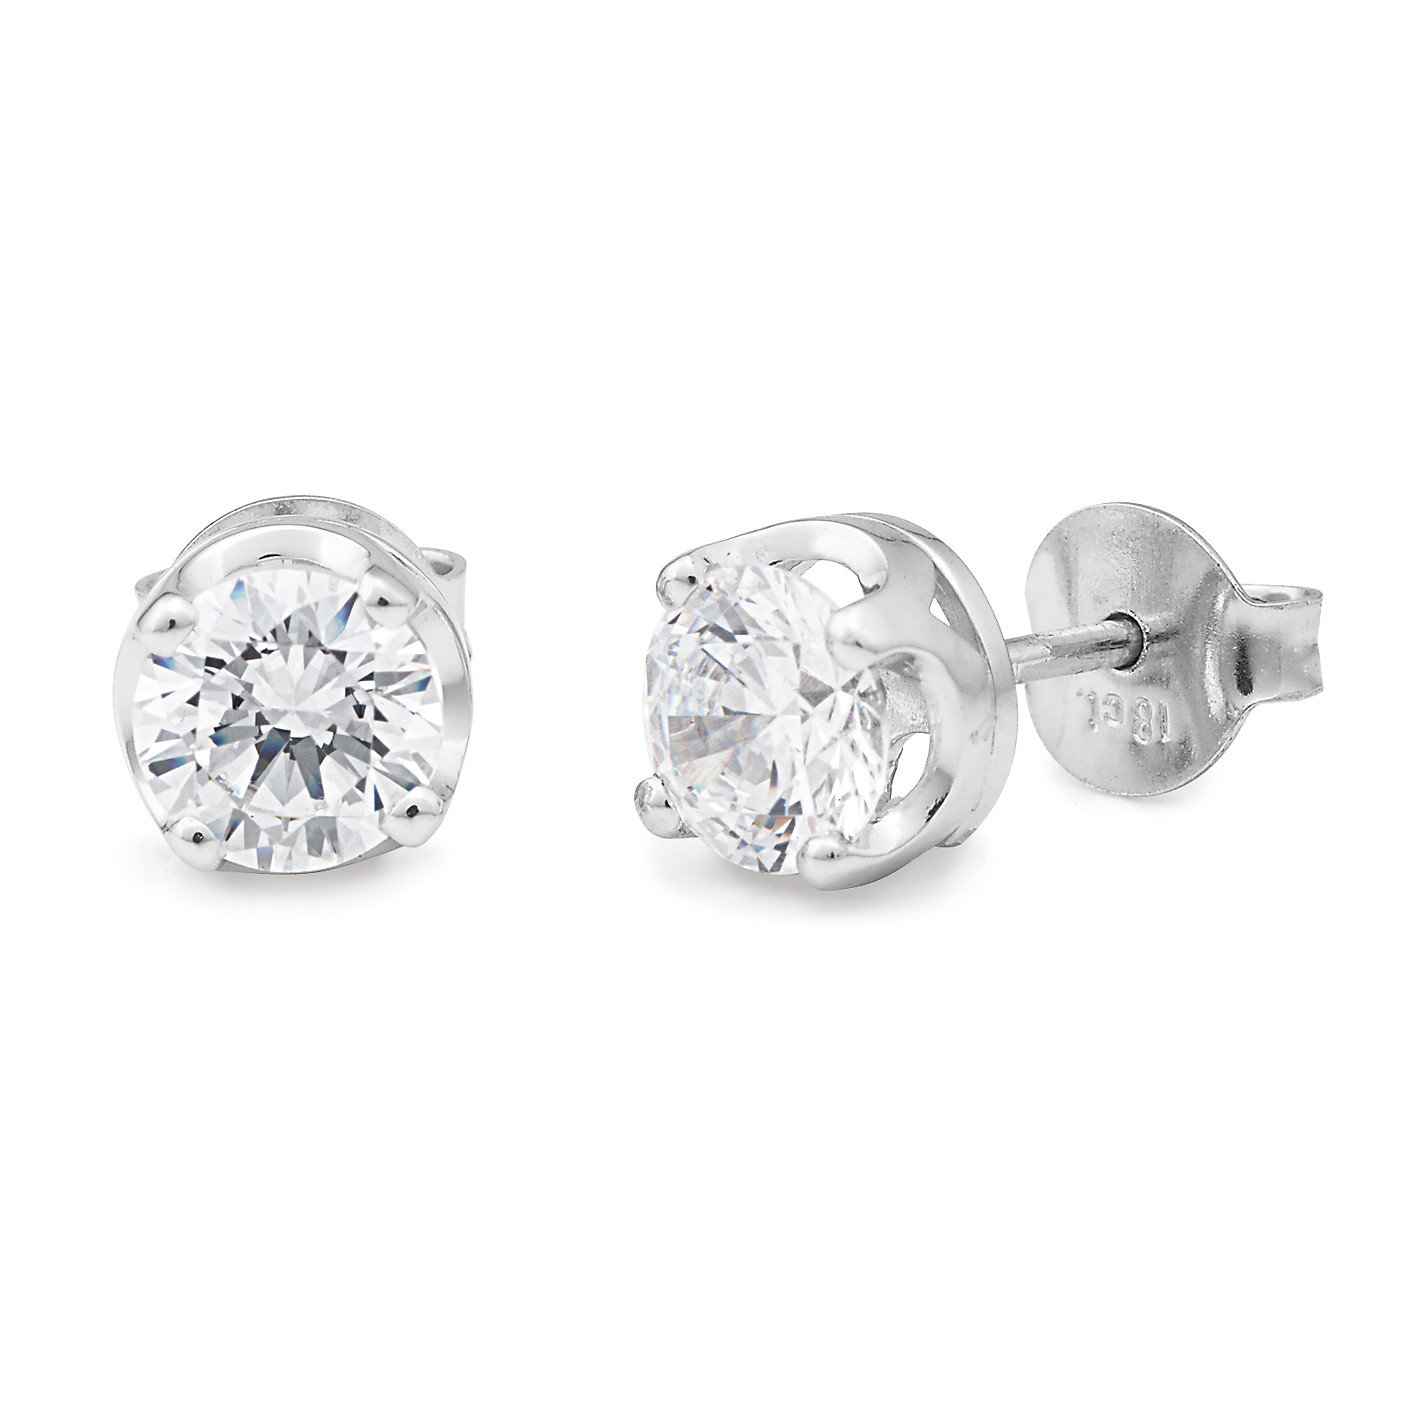 Diamond 4 Claw Stud Earring in 9ct White Gold. TDW approx. 1.50ct ...